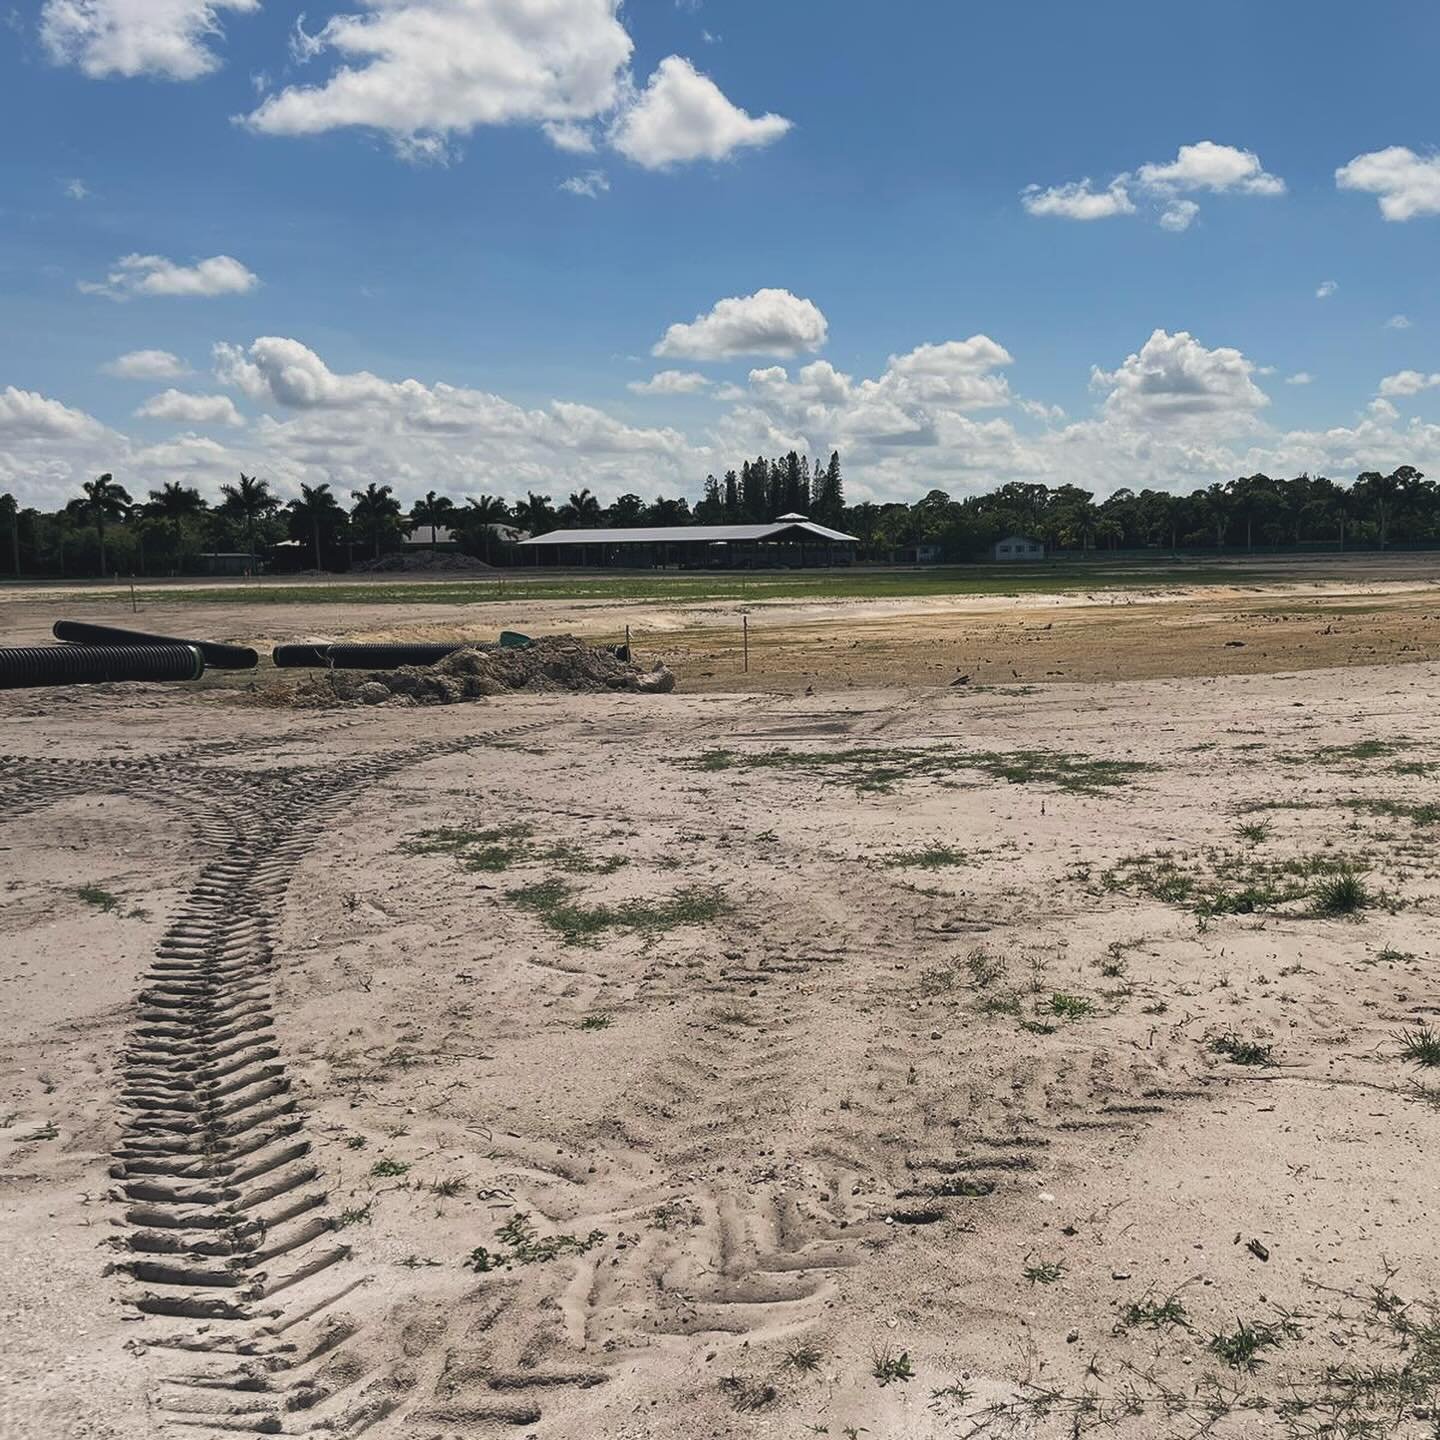 Exploring the construction site progress firsthand! Every visit brings new insights and excitement as we witness our project taking shape.

20 acres, with 10 additional acres being added to this equestrian farm complex. Multiple equestrian buildings,